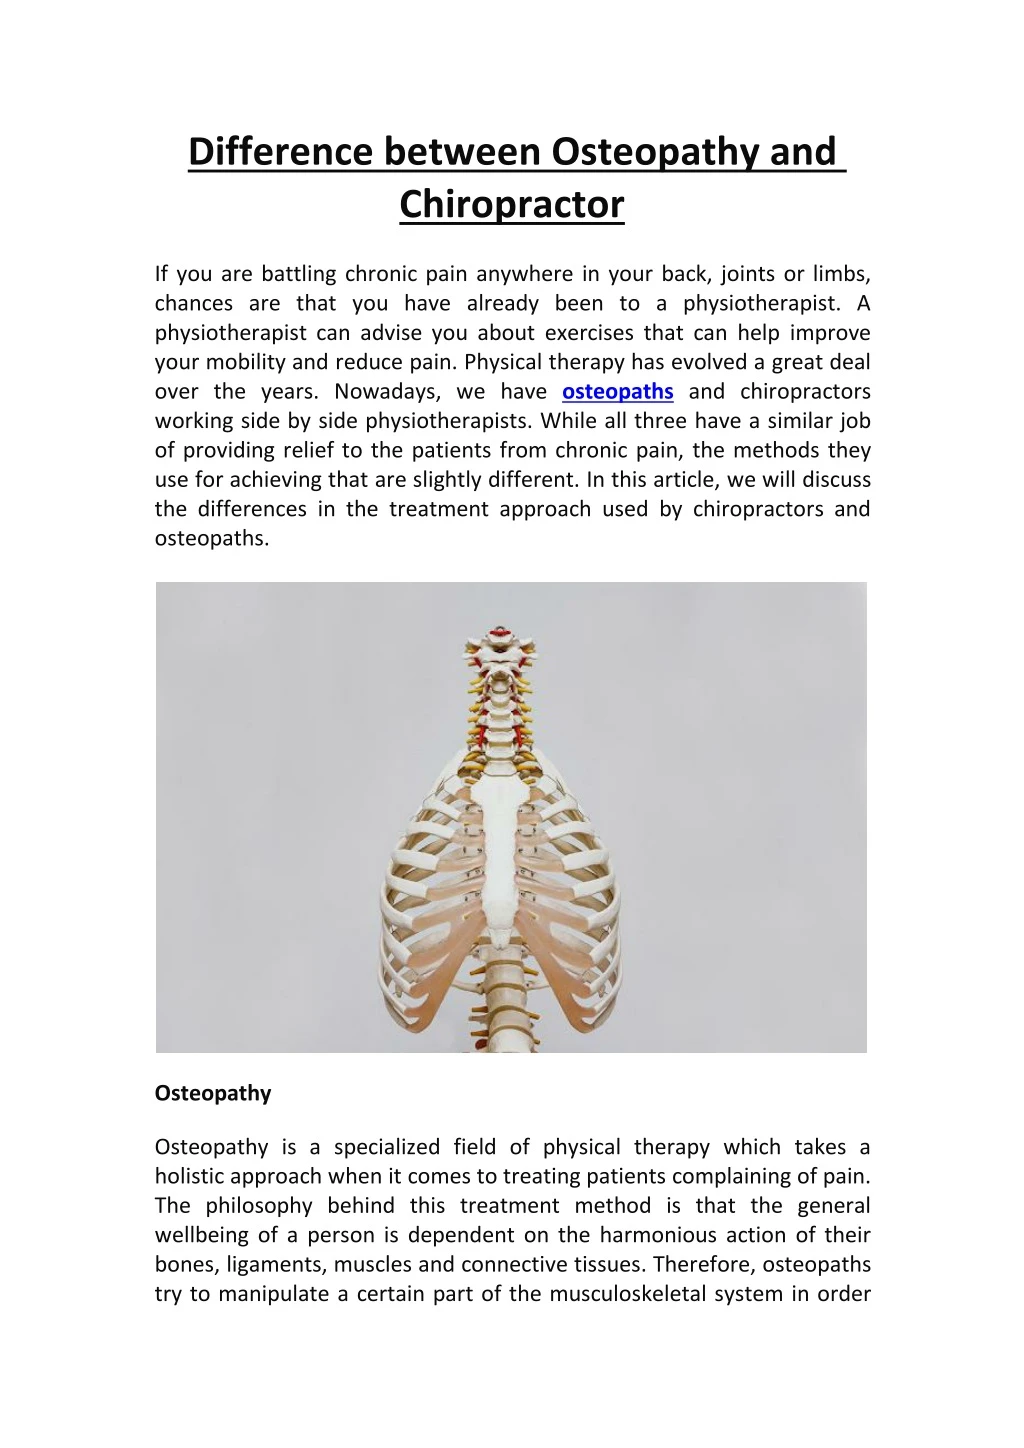 difference between osteopathy and chiropractor